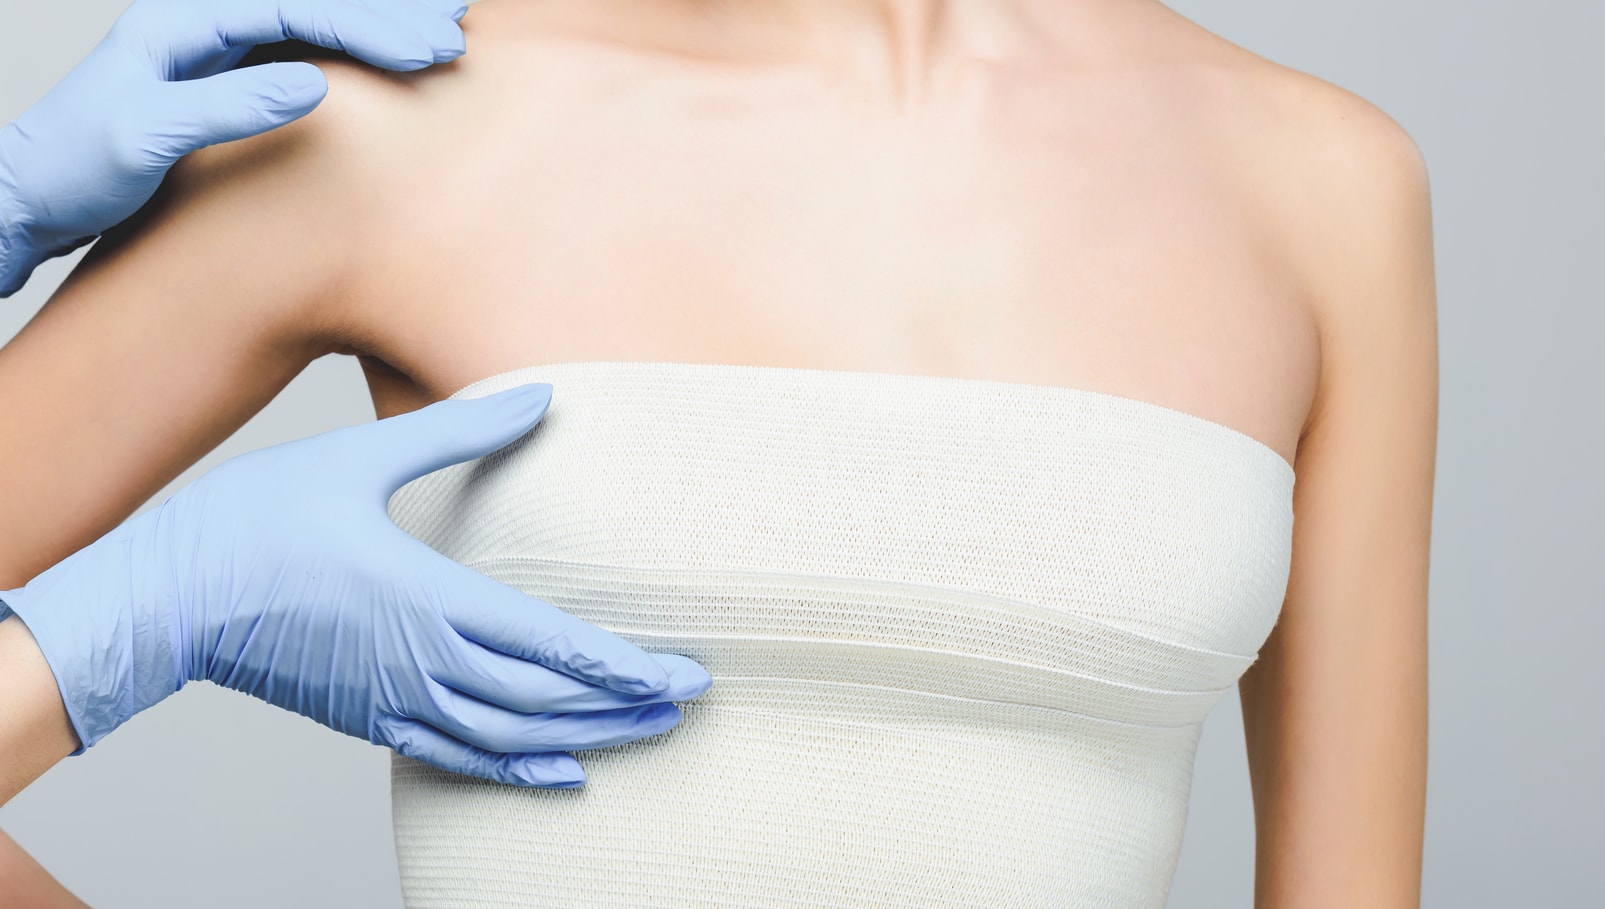 Capsulectomy for Capsular Contracture